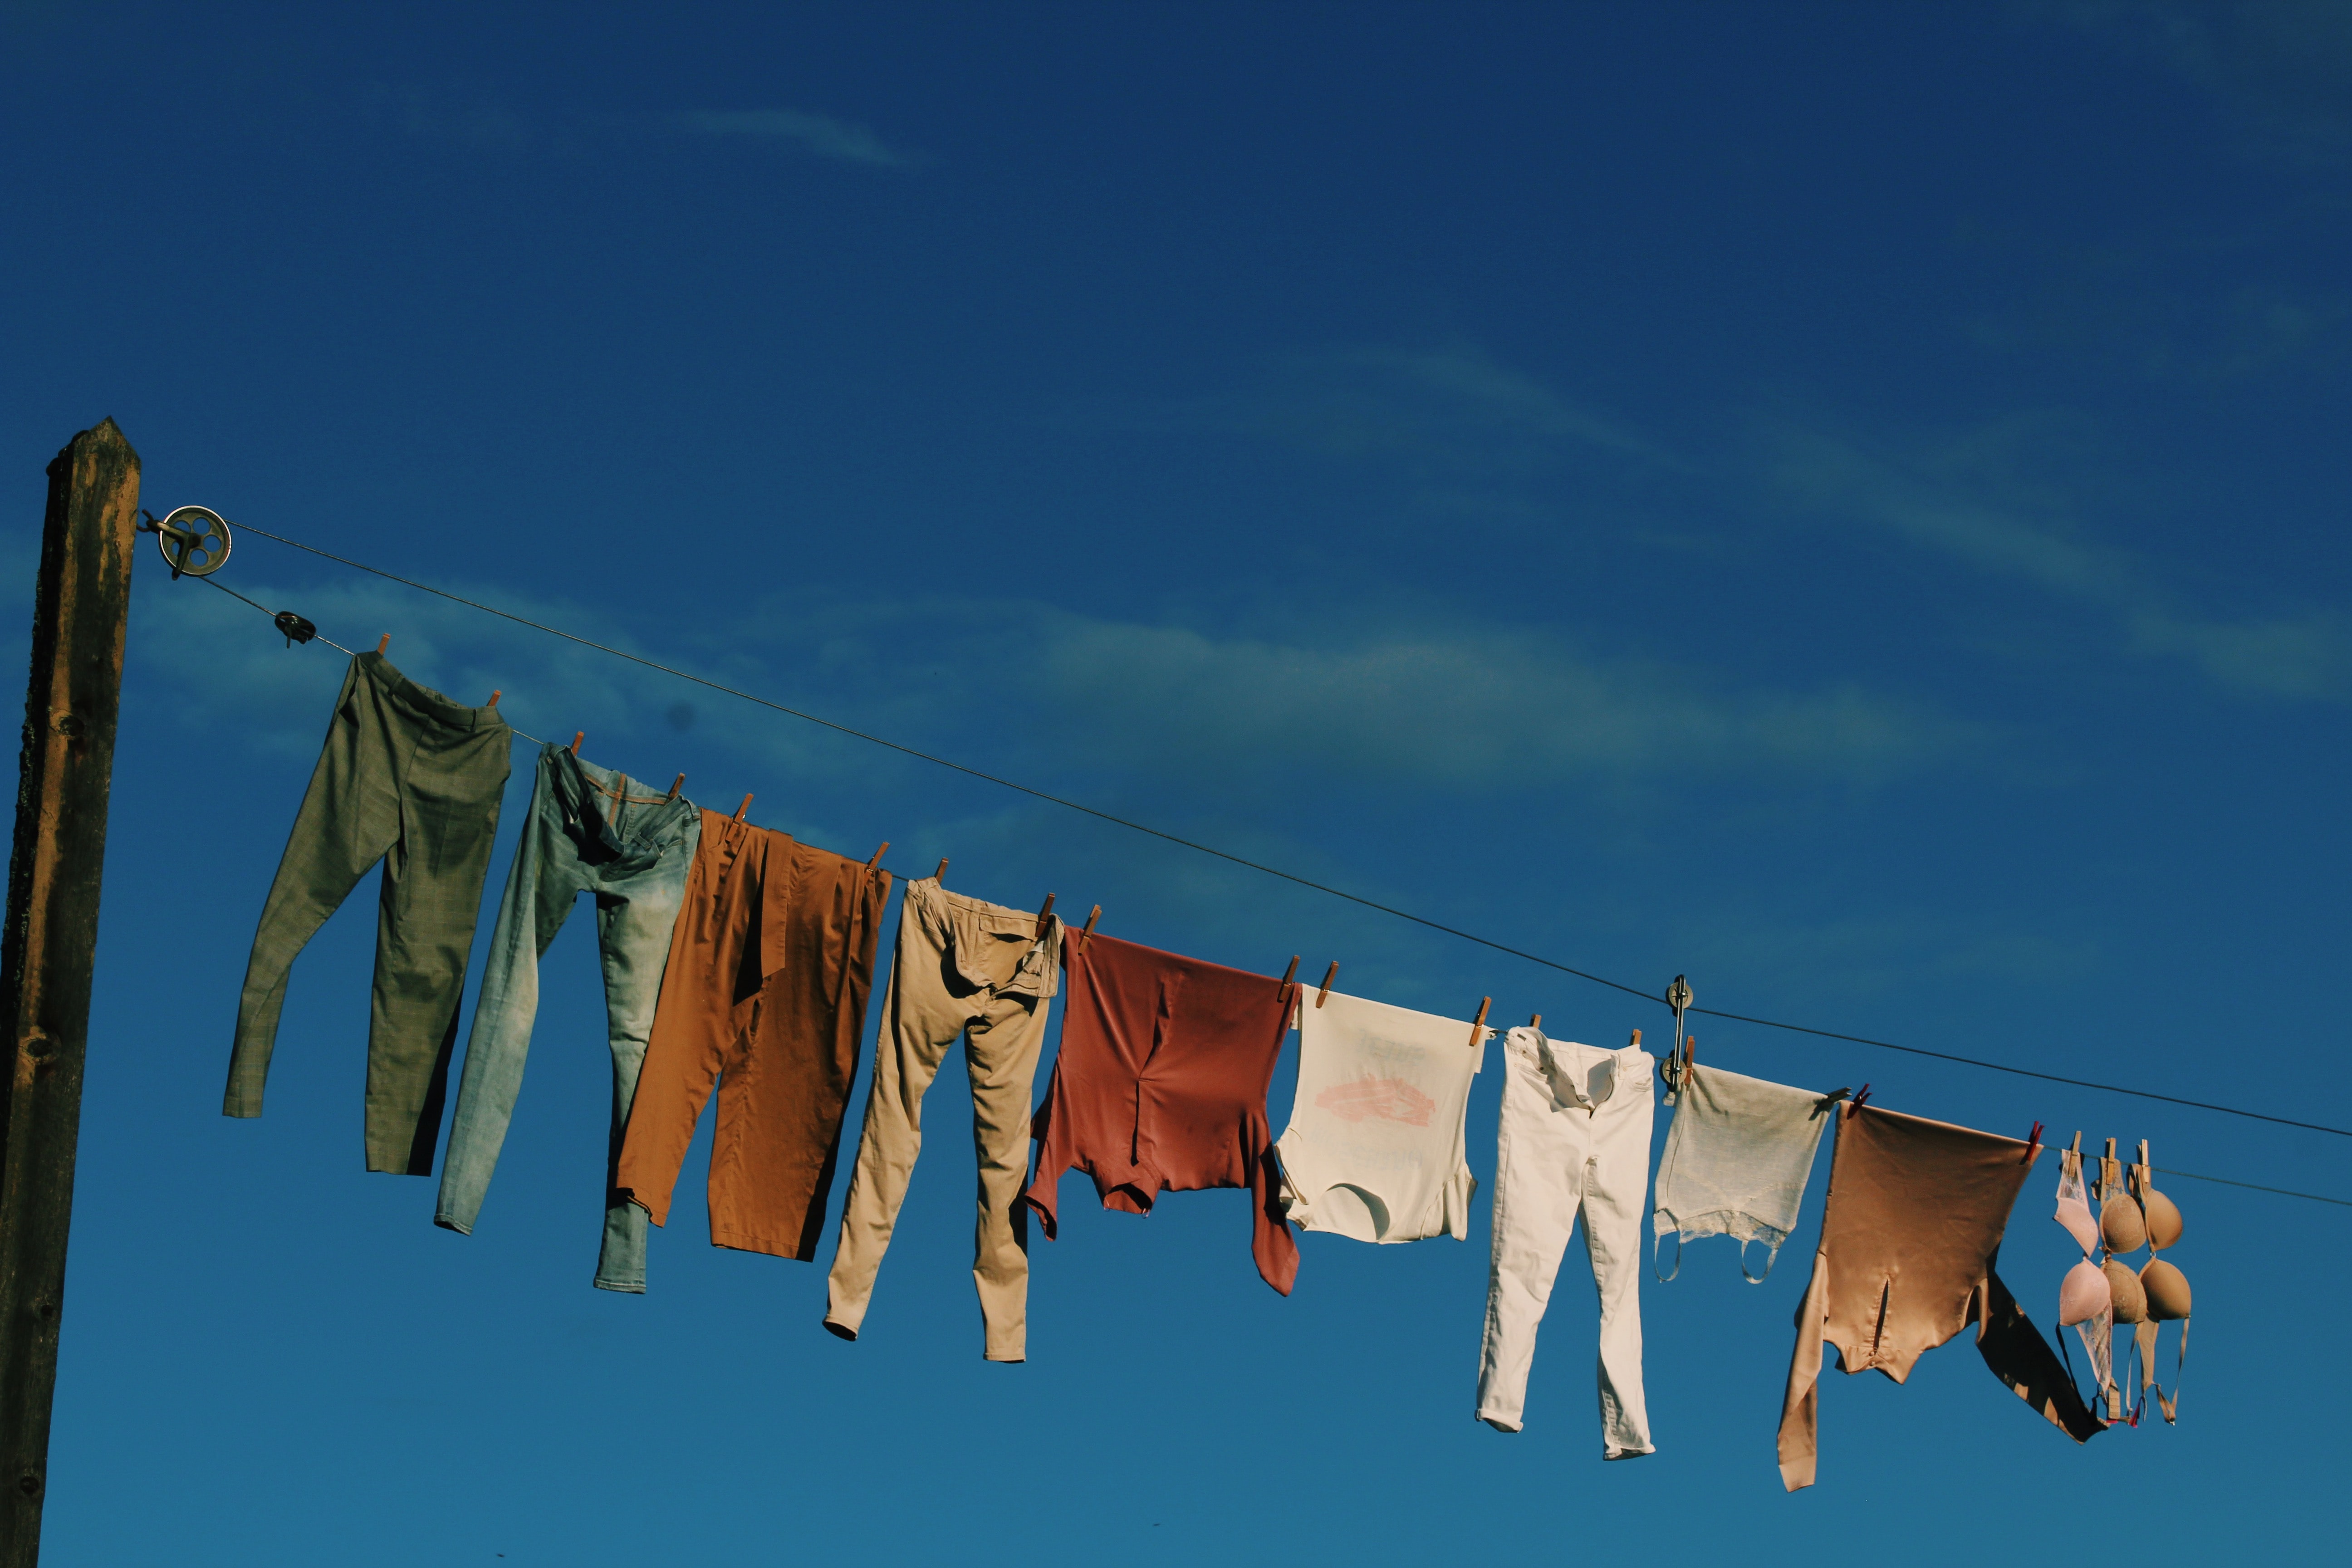 Laundry being hanged outside to dry.